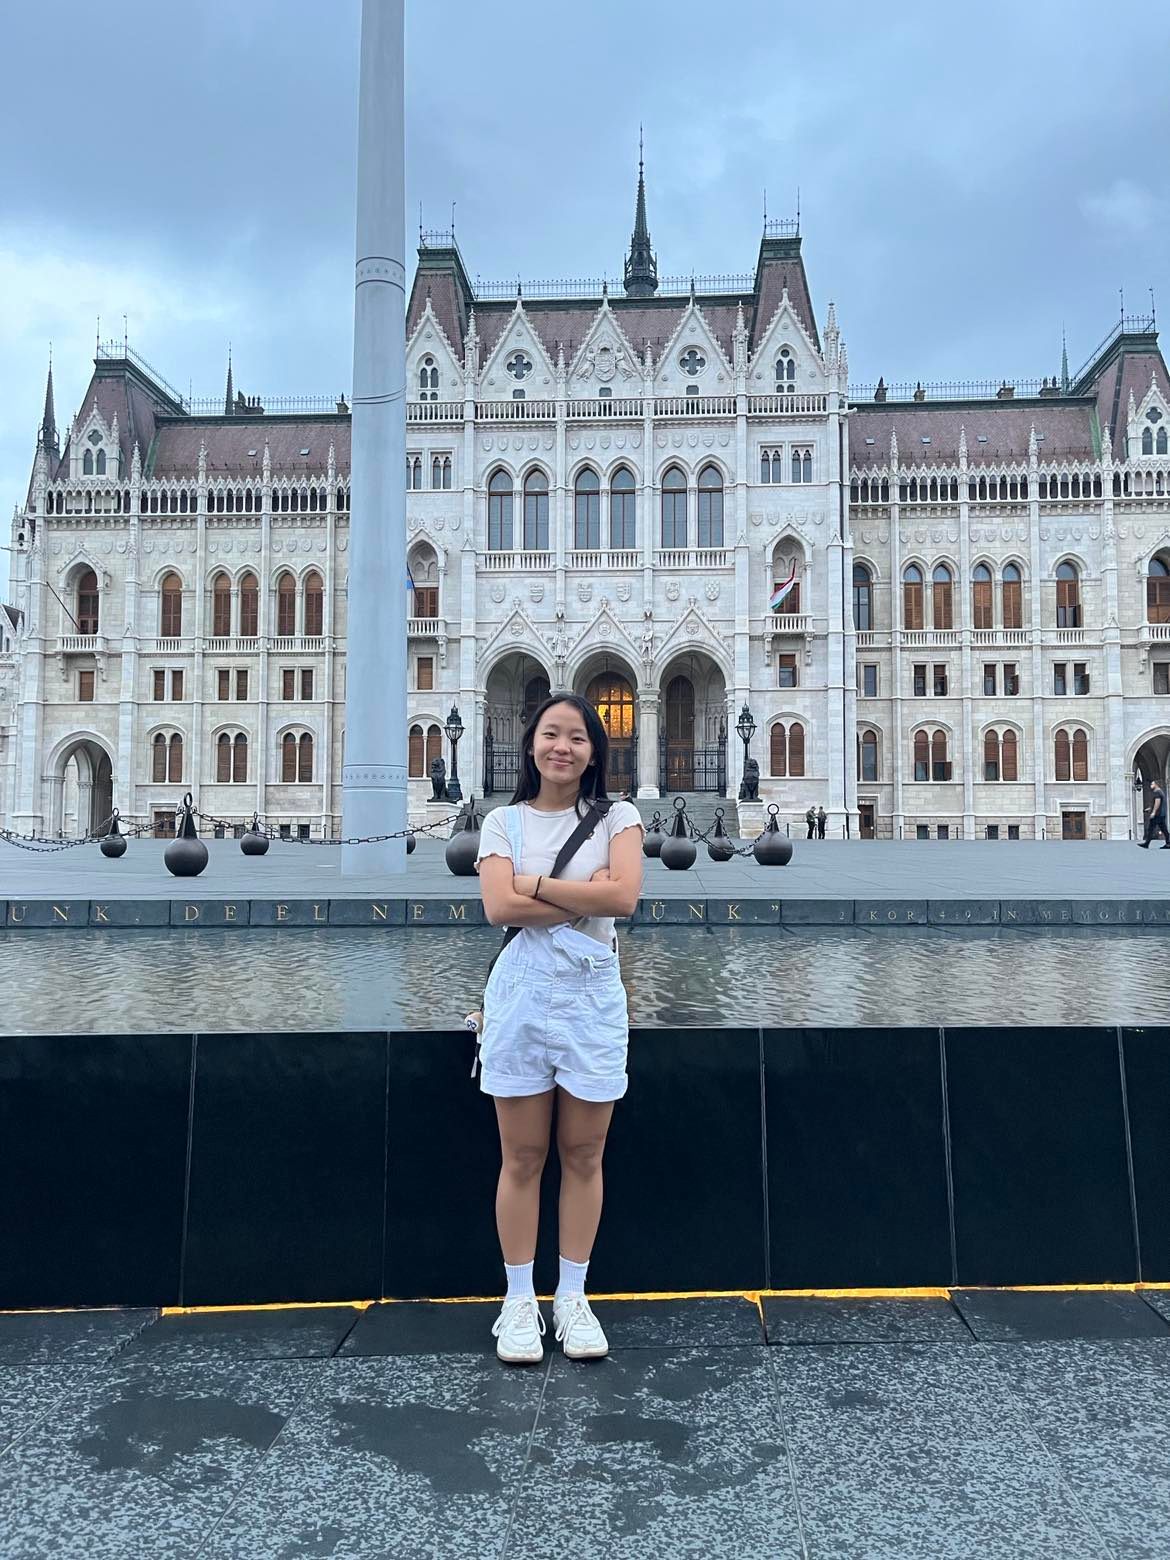 A Visit To The Hungarian Parliament